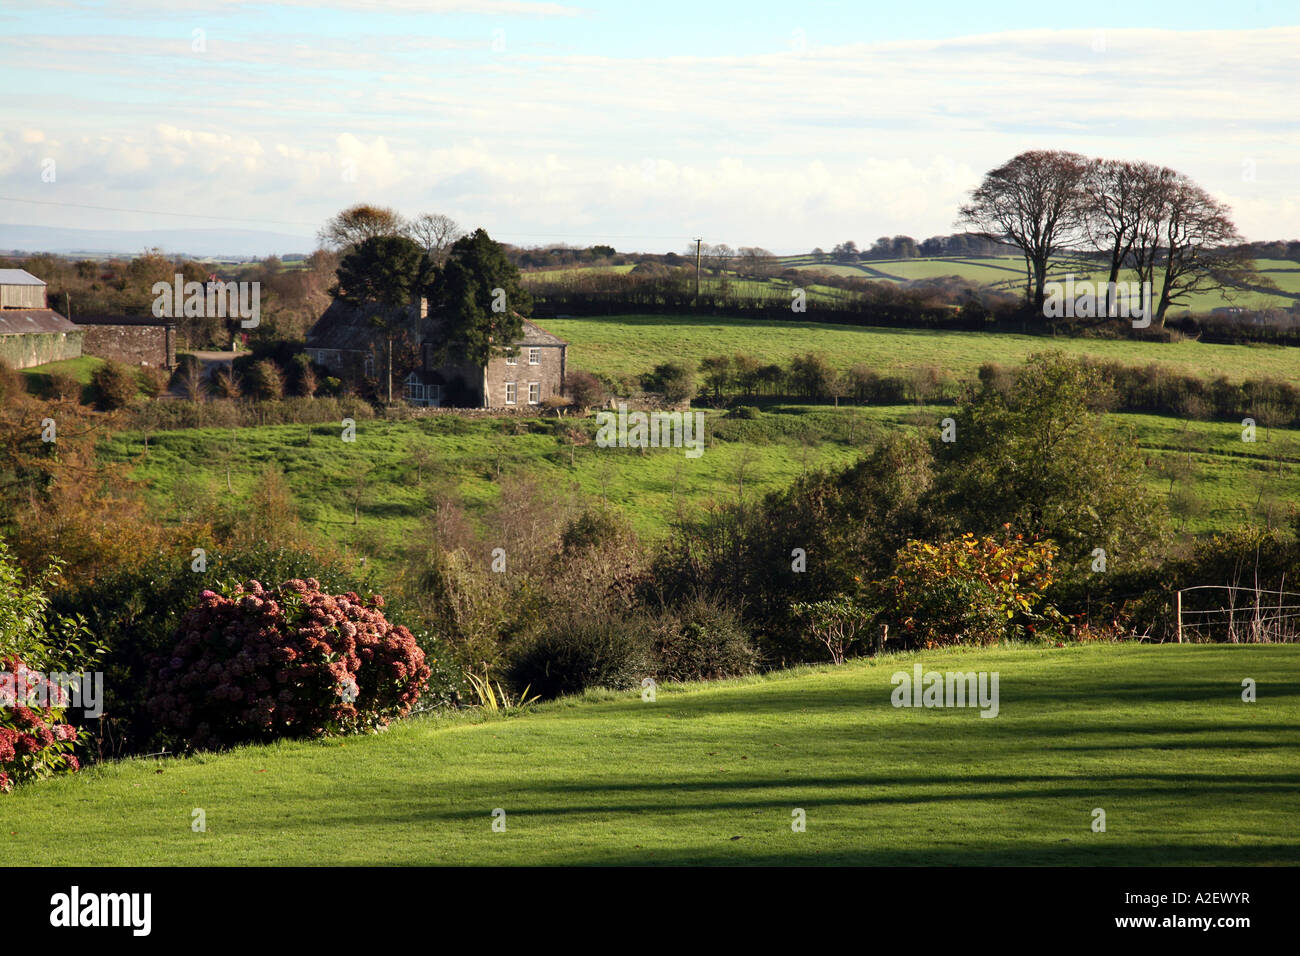 Cornwall countryside; A View of a Cornish countryside landscape near Looe, Cornwall, UK Stock Photo